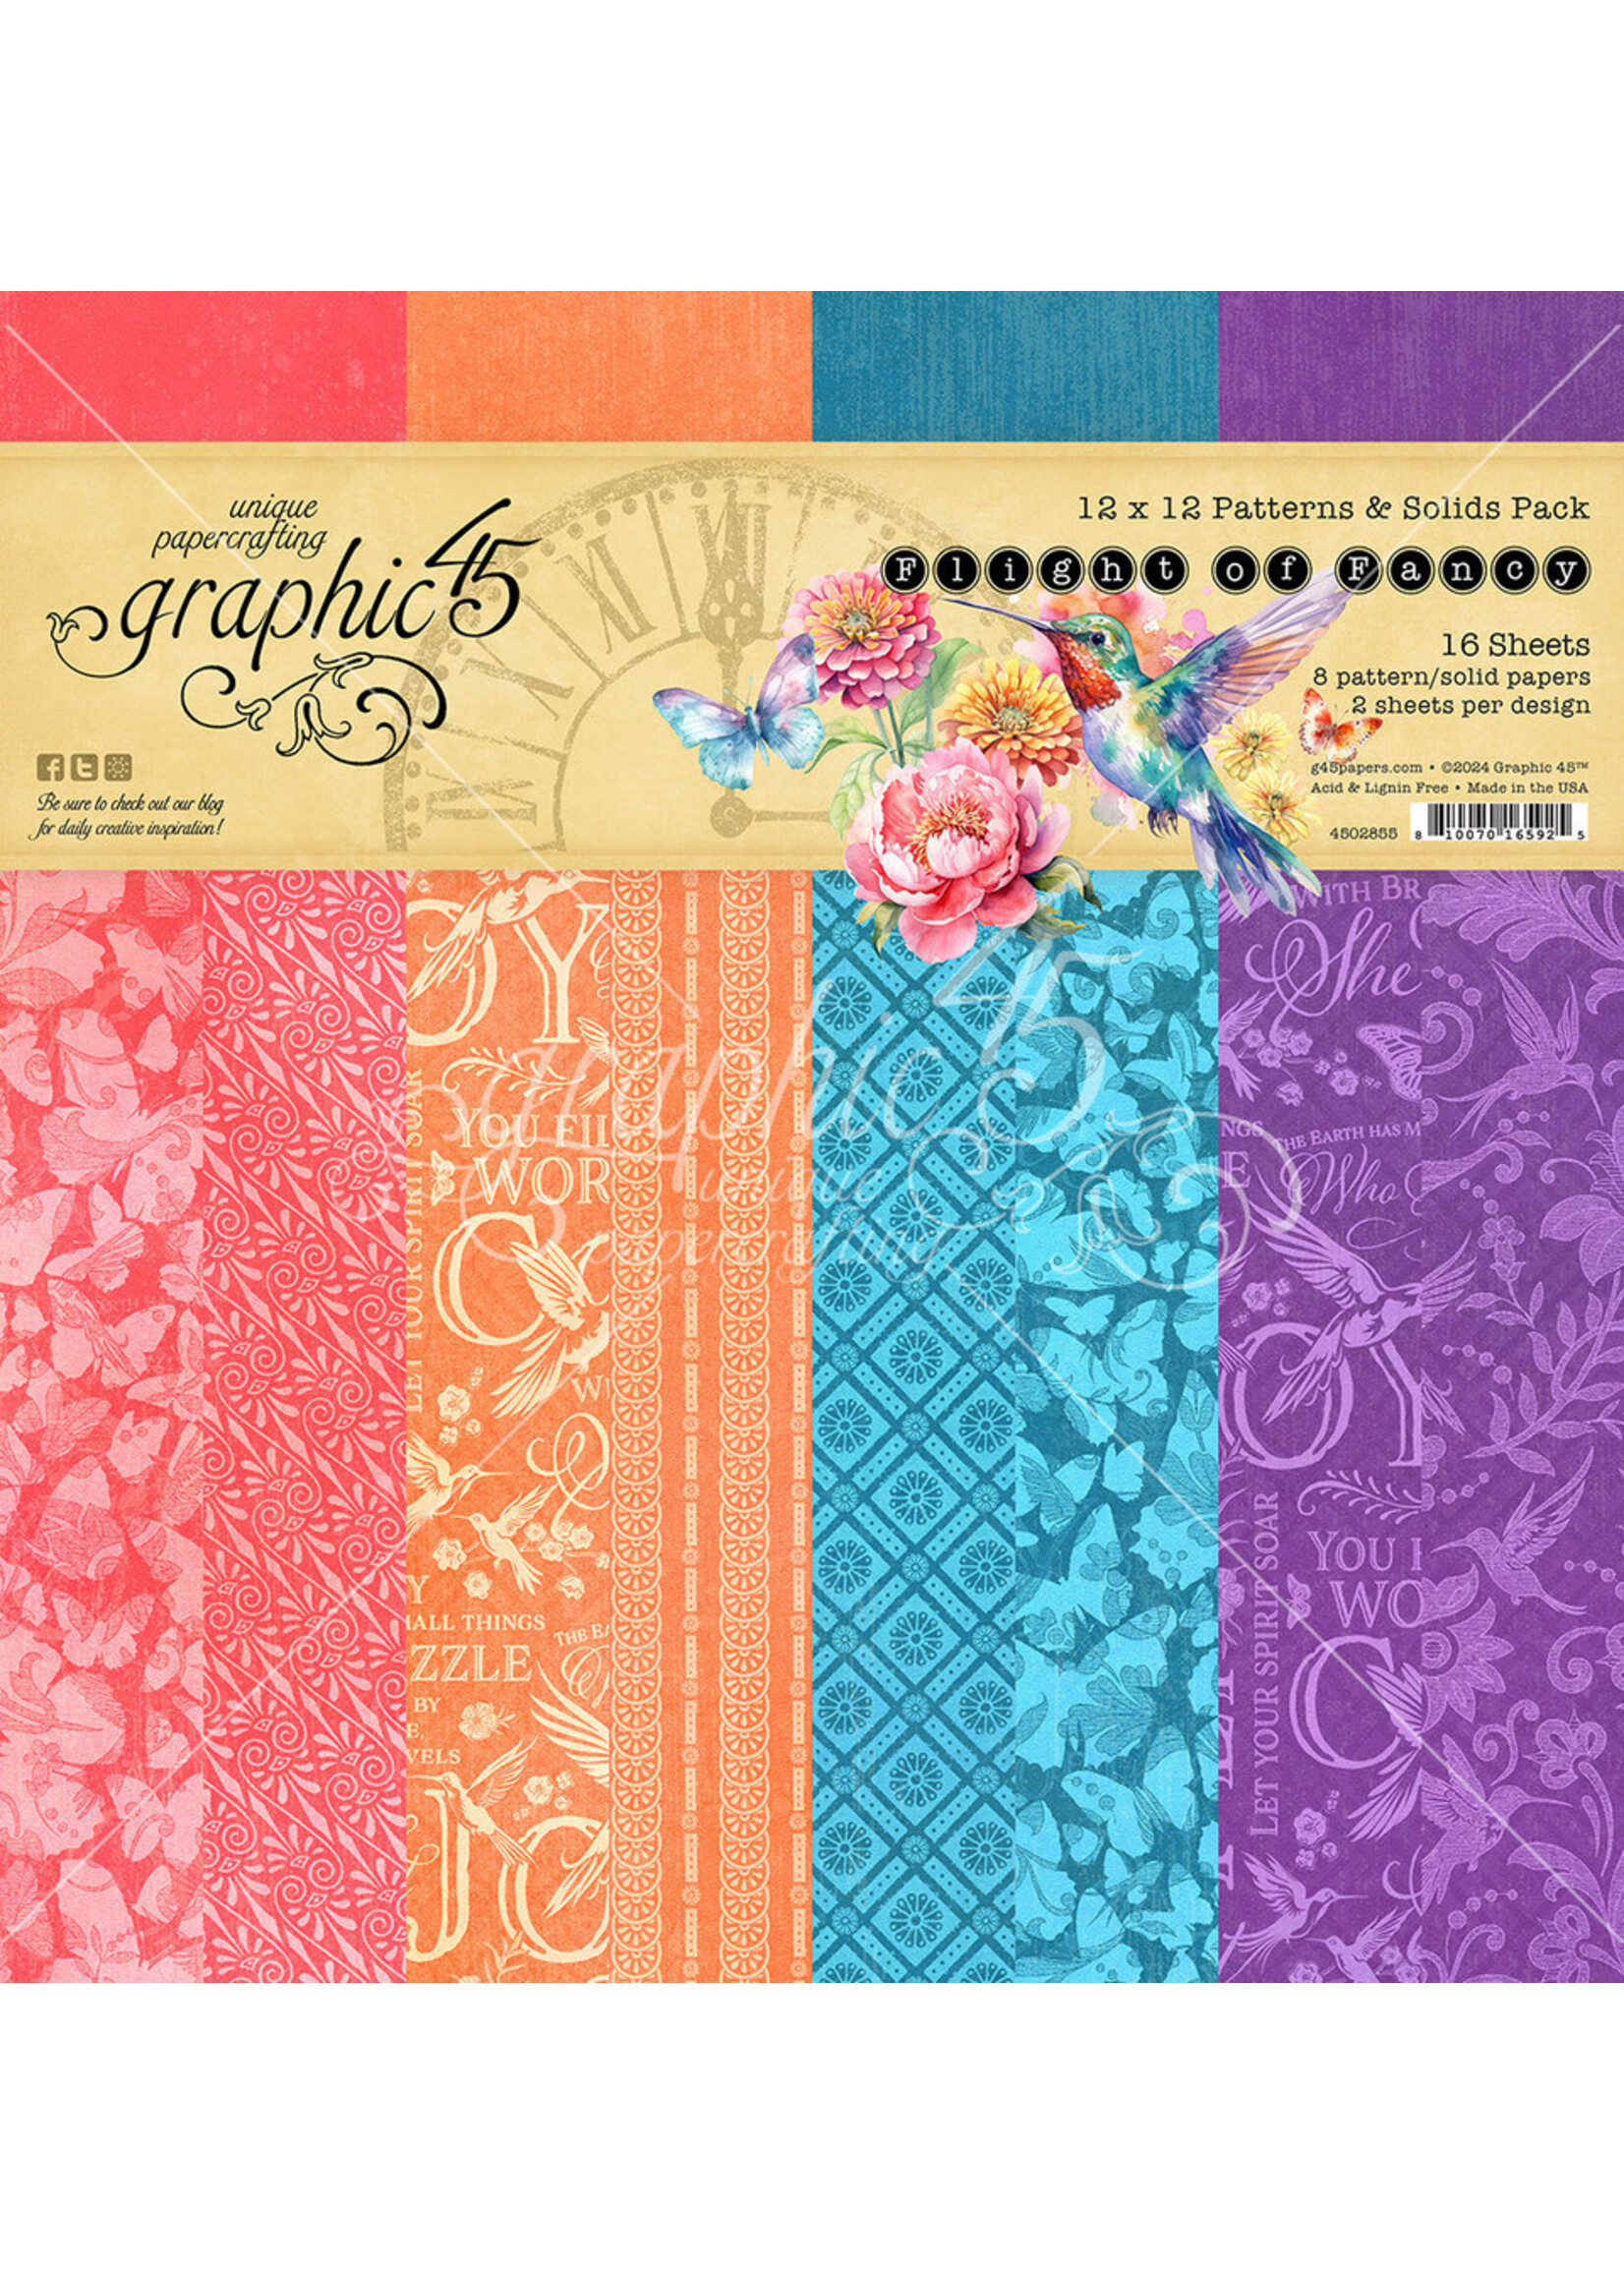 Graphic 45 12x12 Patterns and Solids Pack, Flight of Fancy